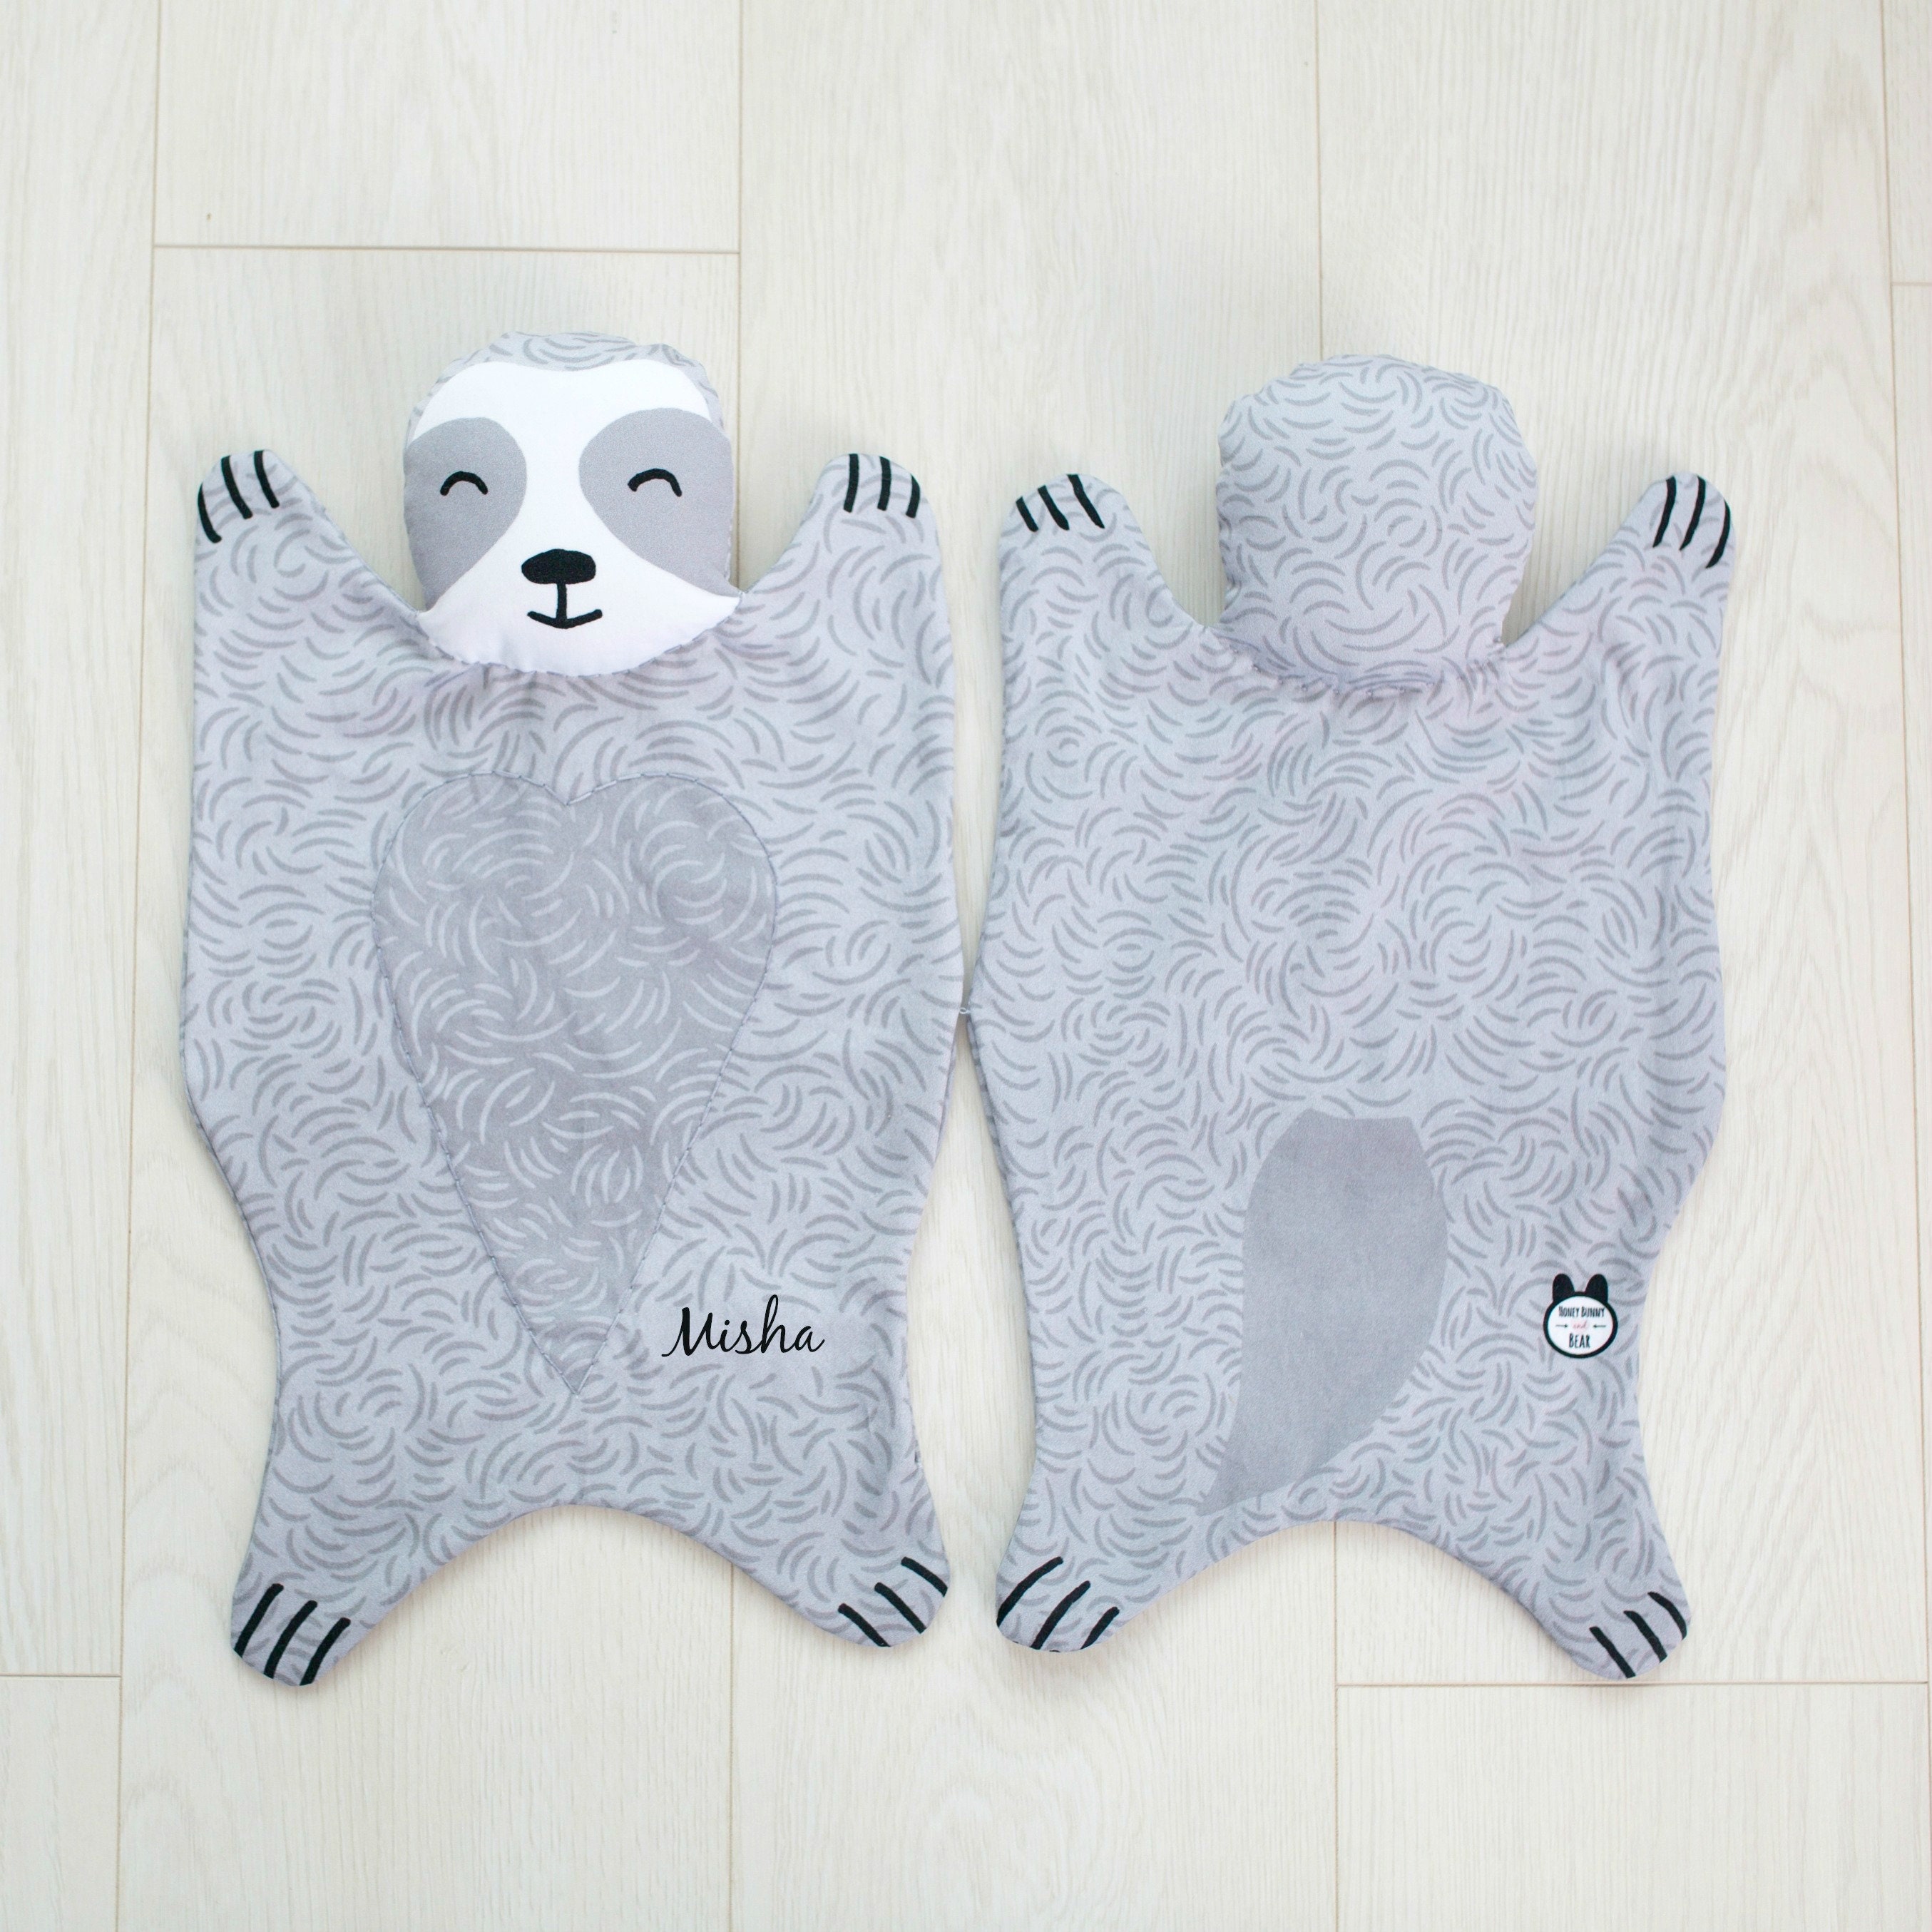 Onesie Extender Add a Size to Baby's Bodysuit. A Must for Cloth